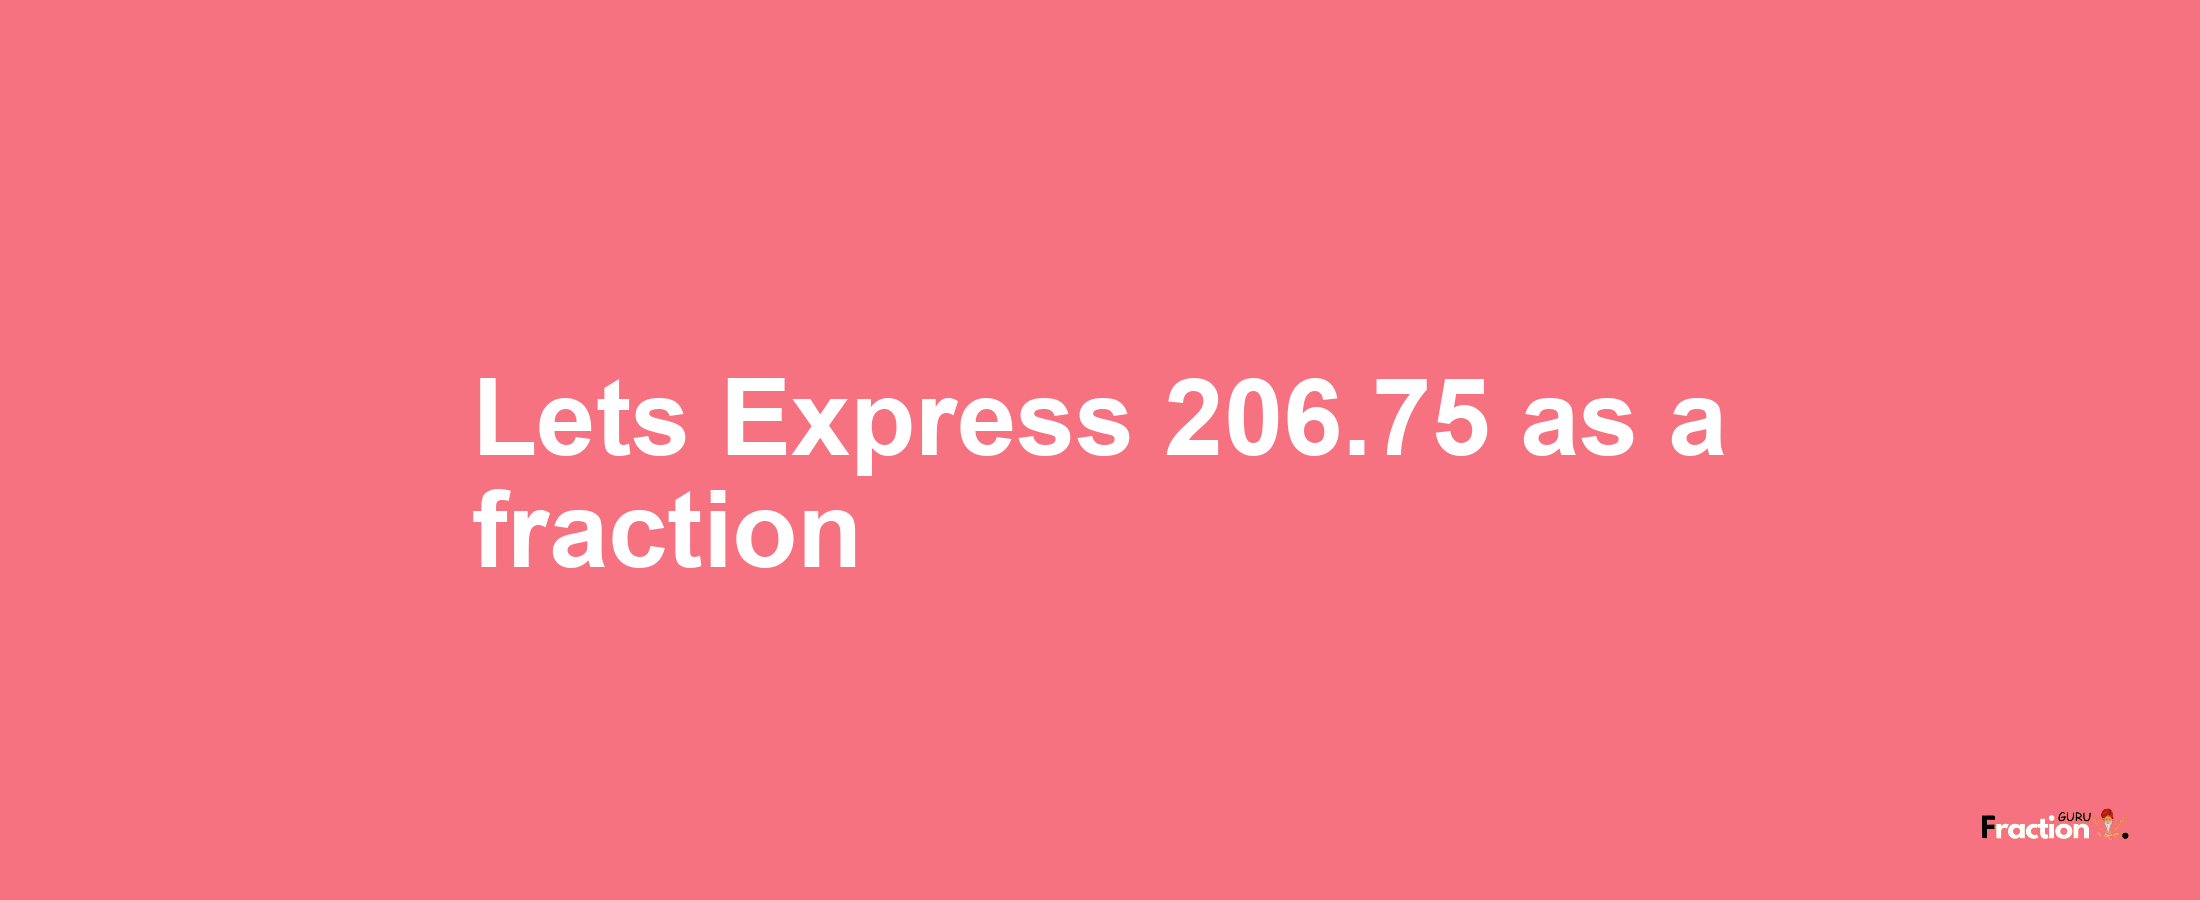 Lets Express 206.75 as afraction